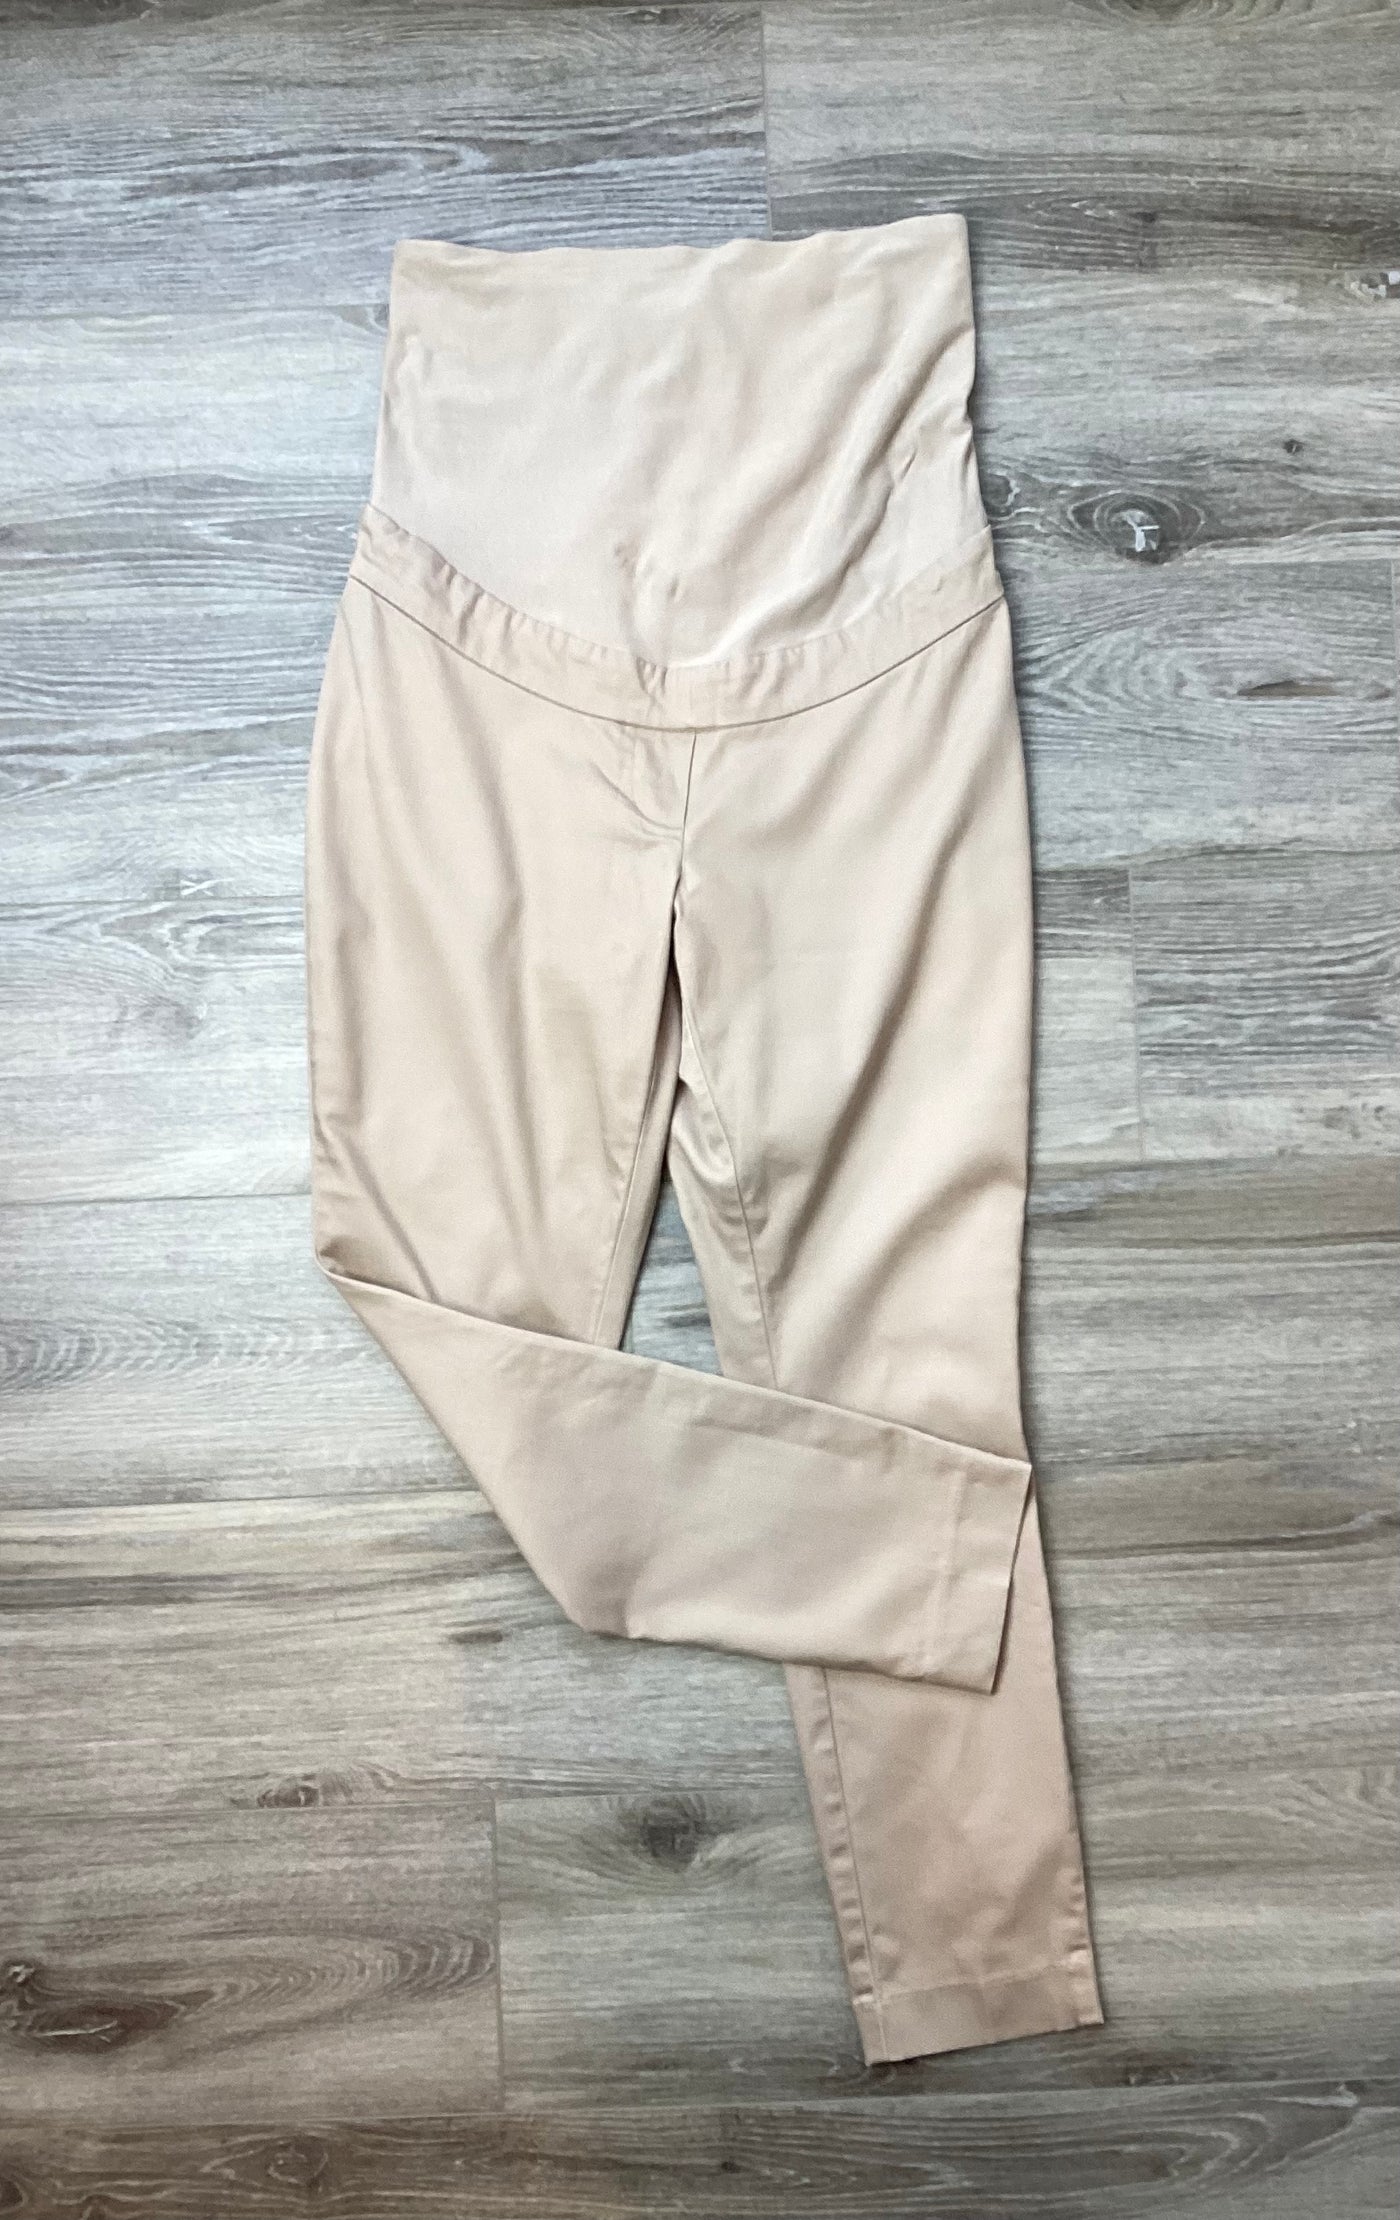 H&M Mama beige overbump chino style ankle grazer trousers - Size S (Approx UK 8/10)